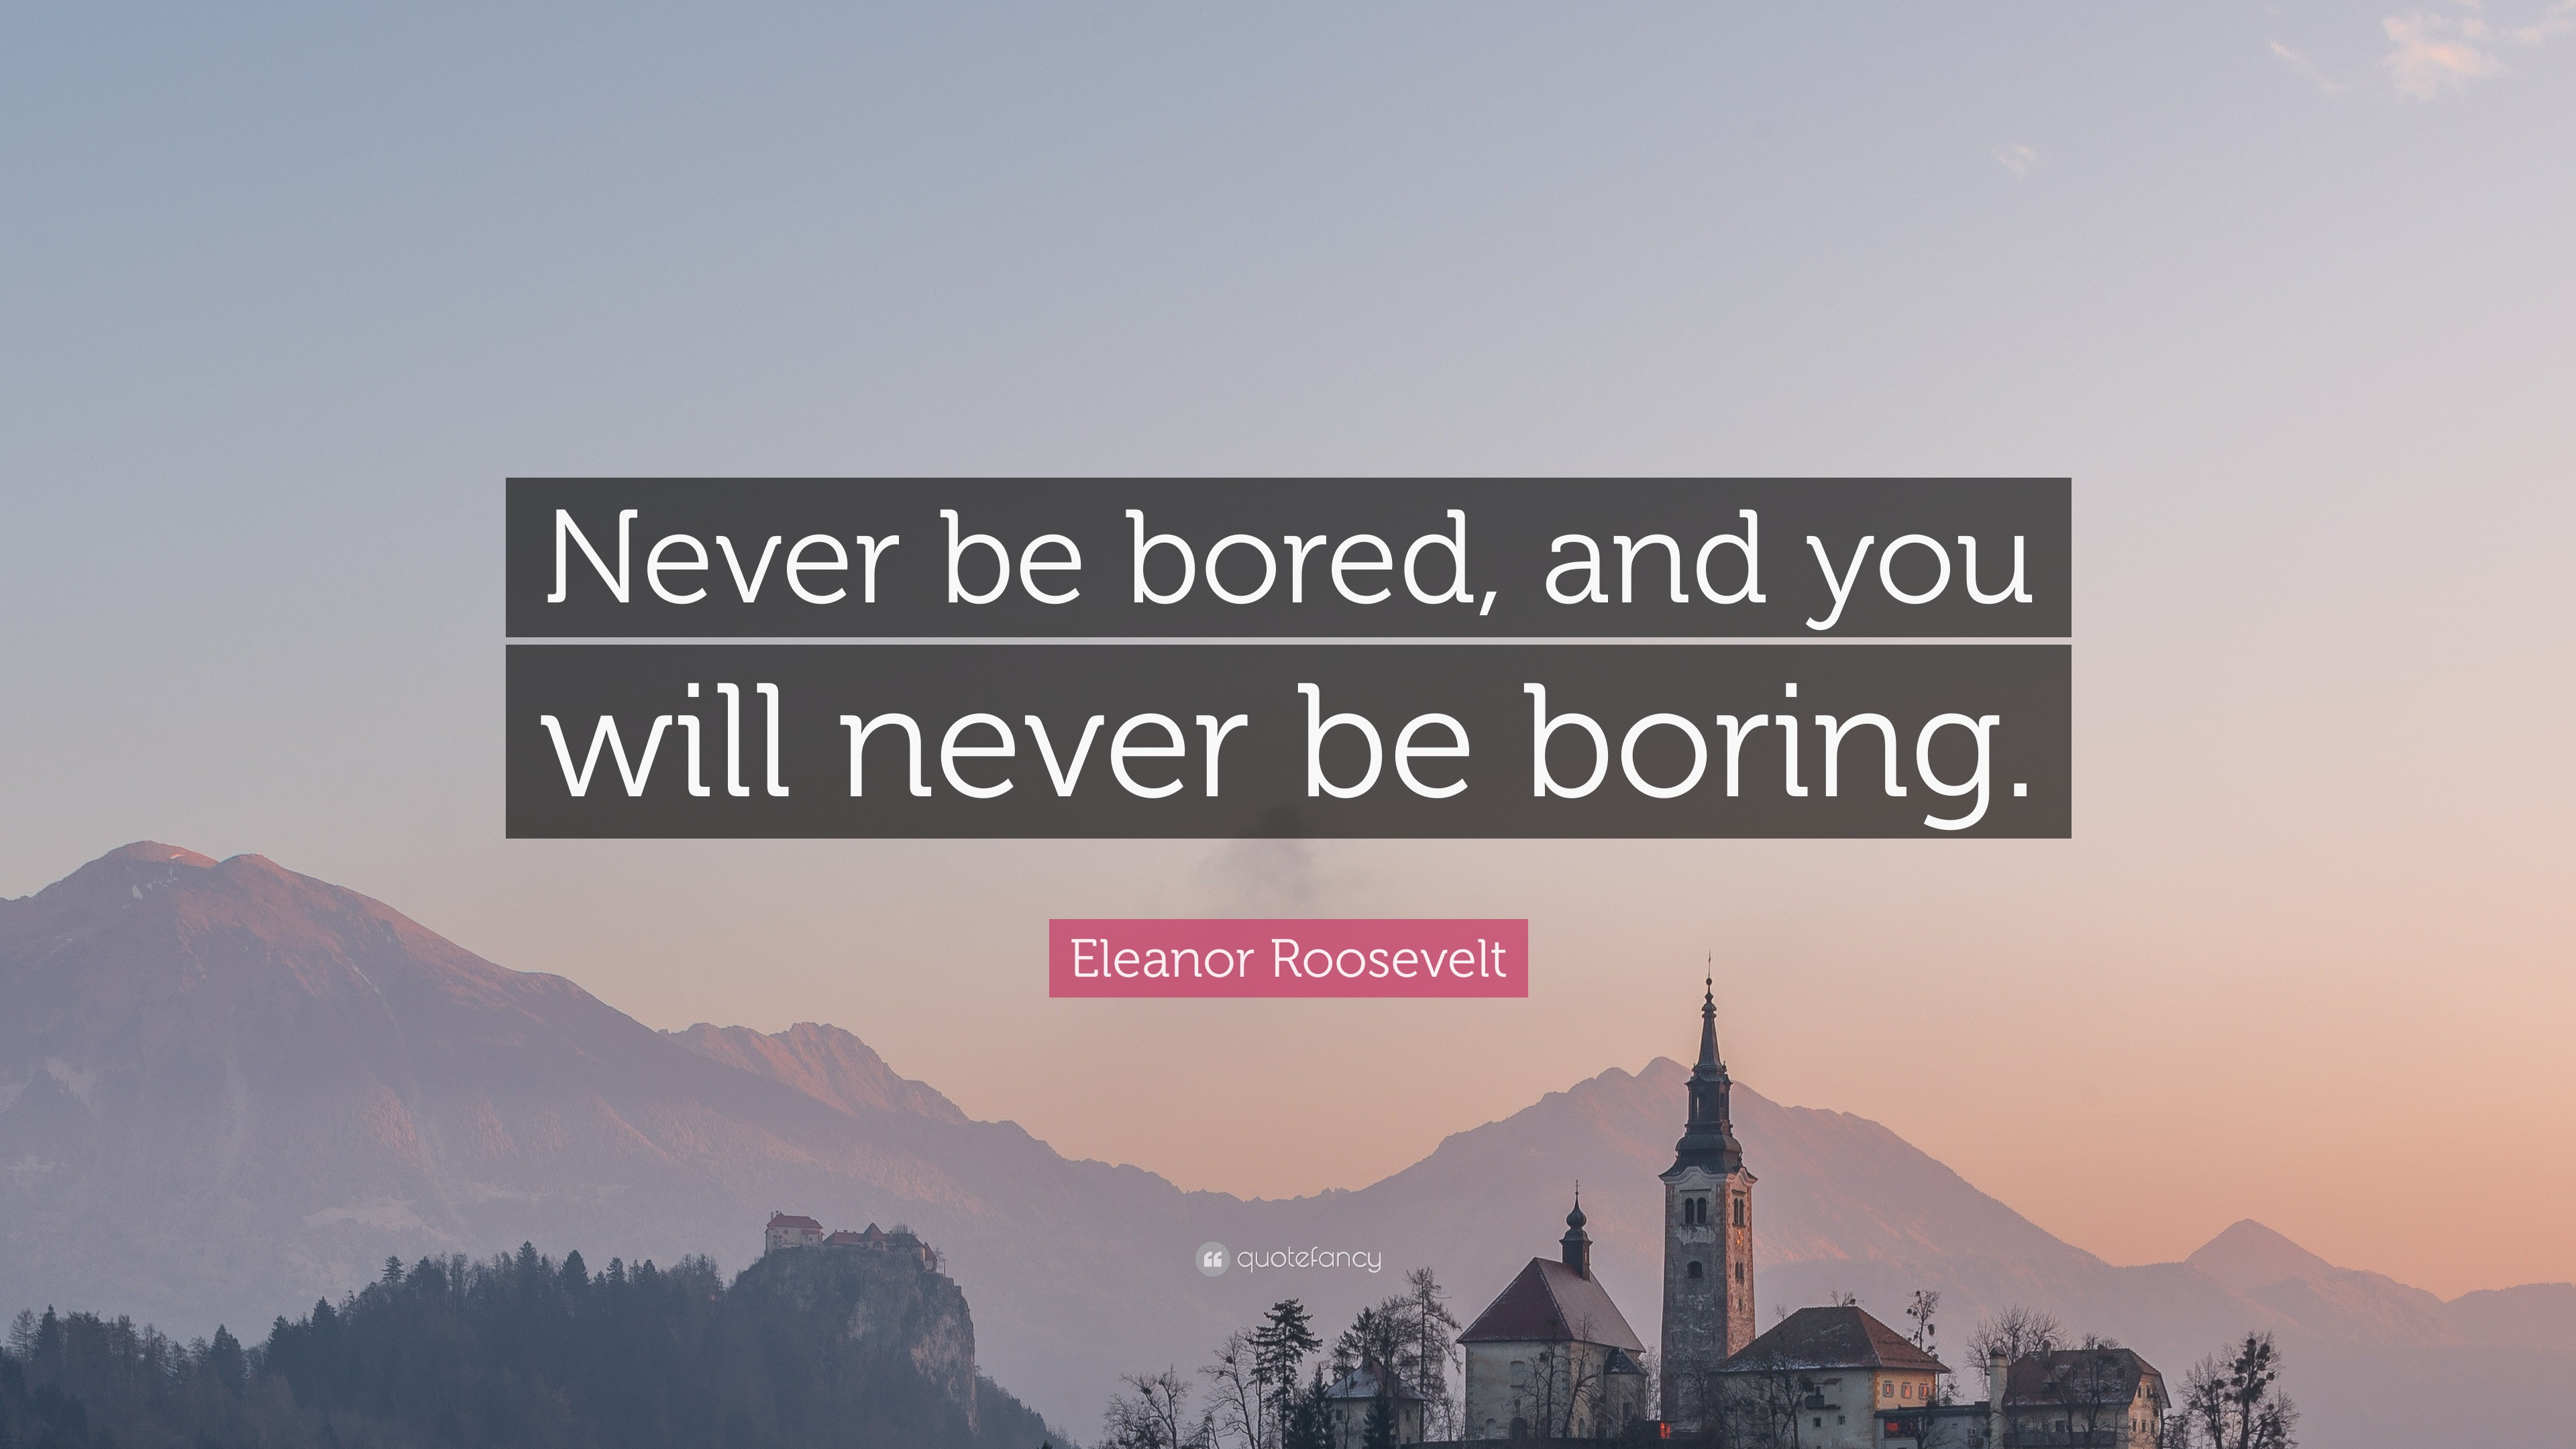 Eleanor Roosevelt Quote: “Never be bored, and you will never be boring.”